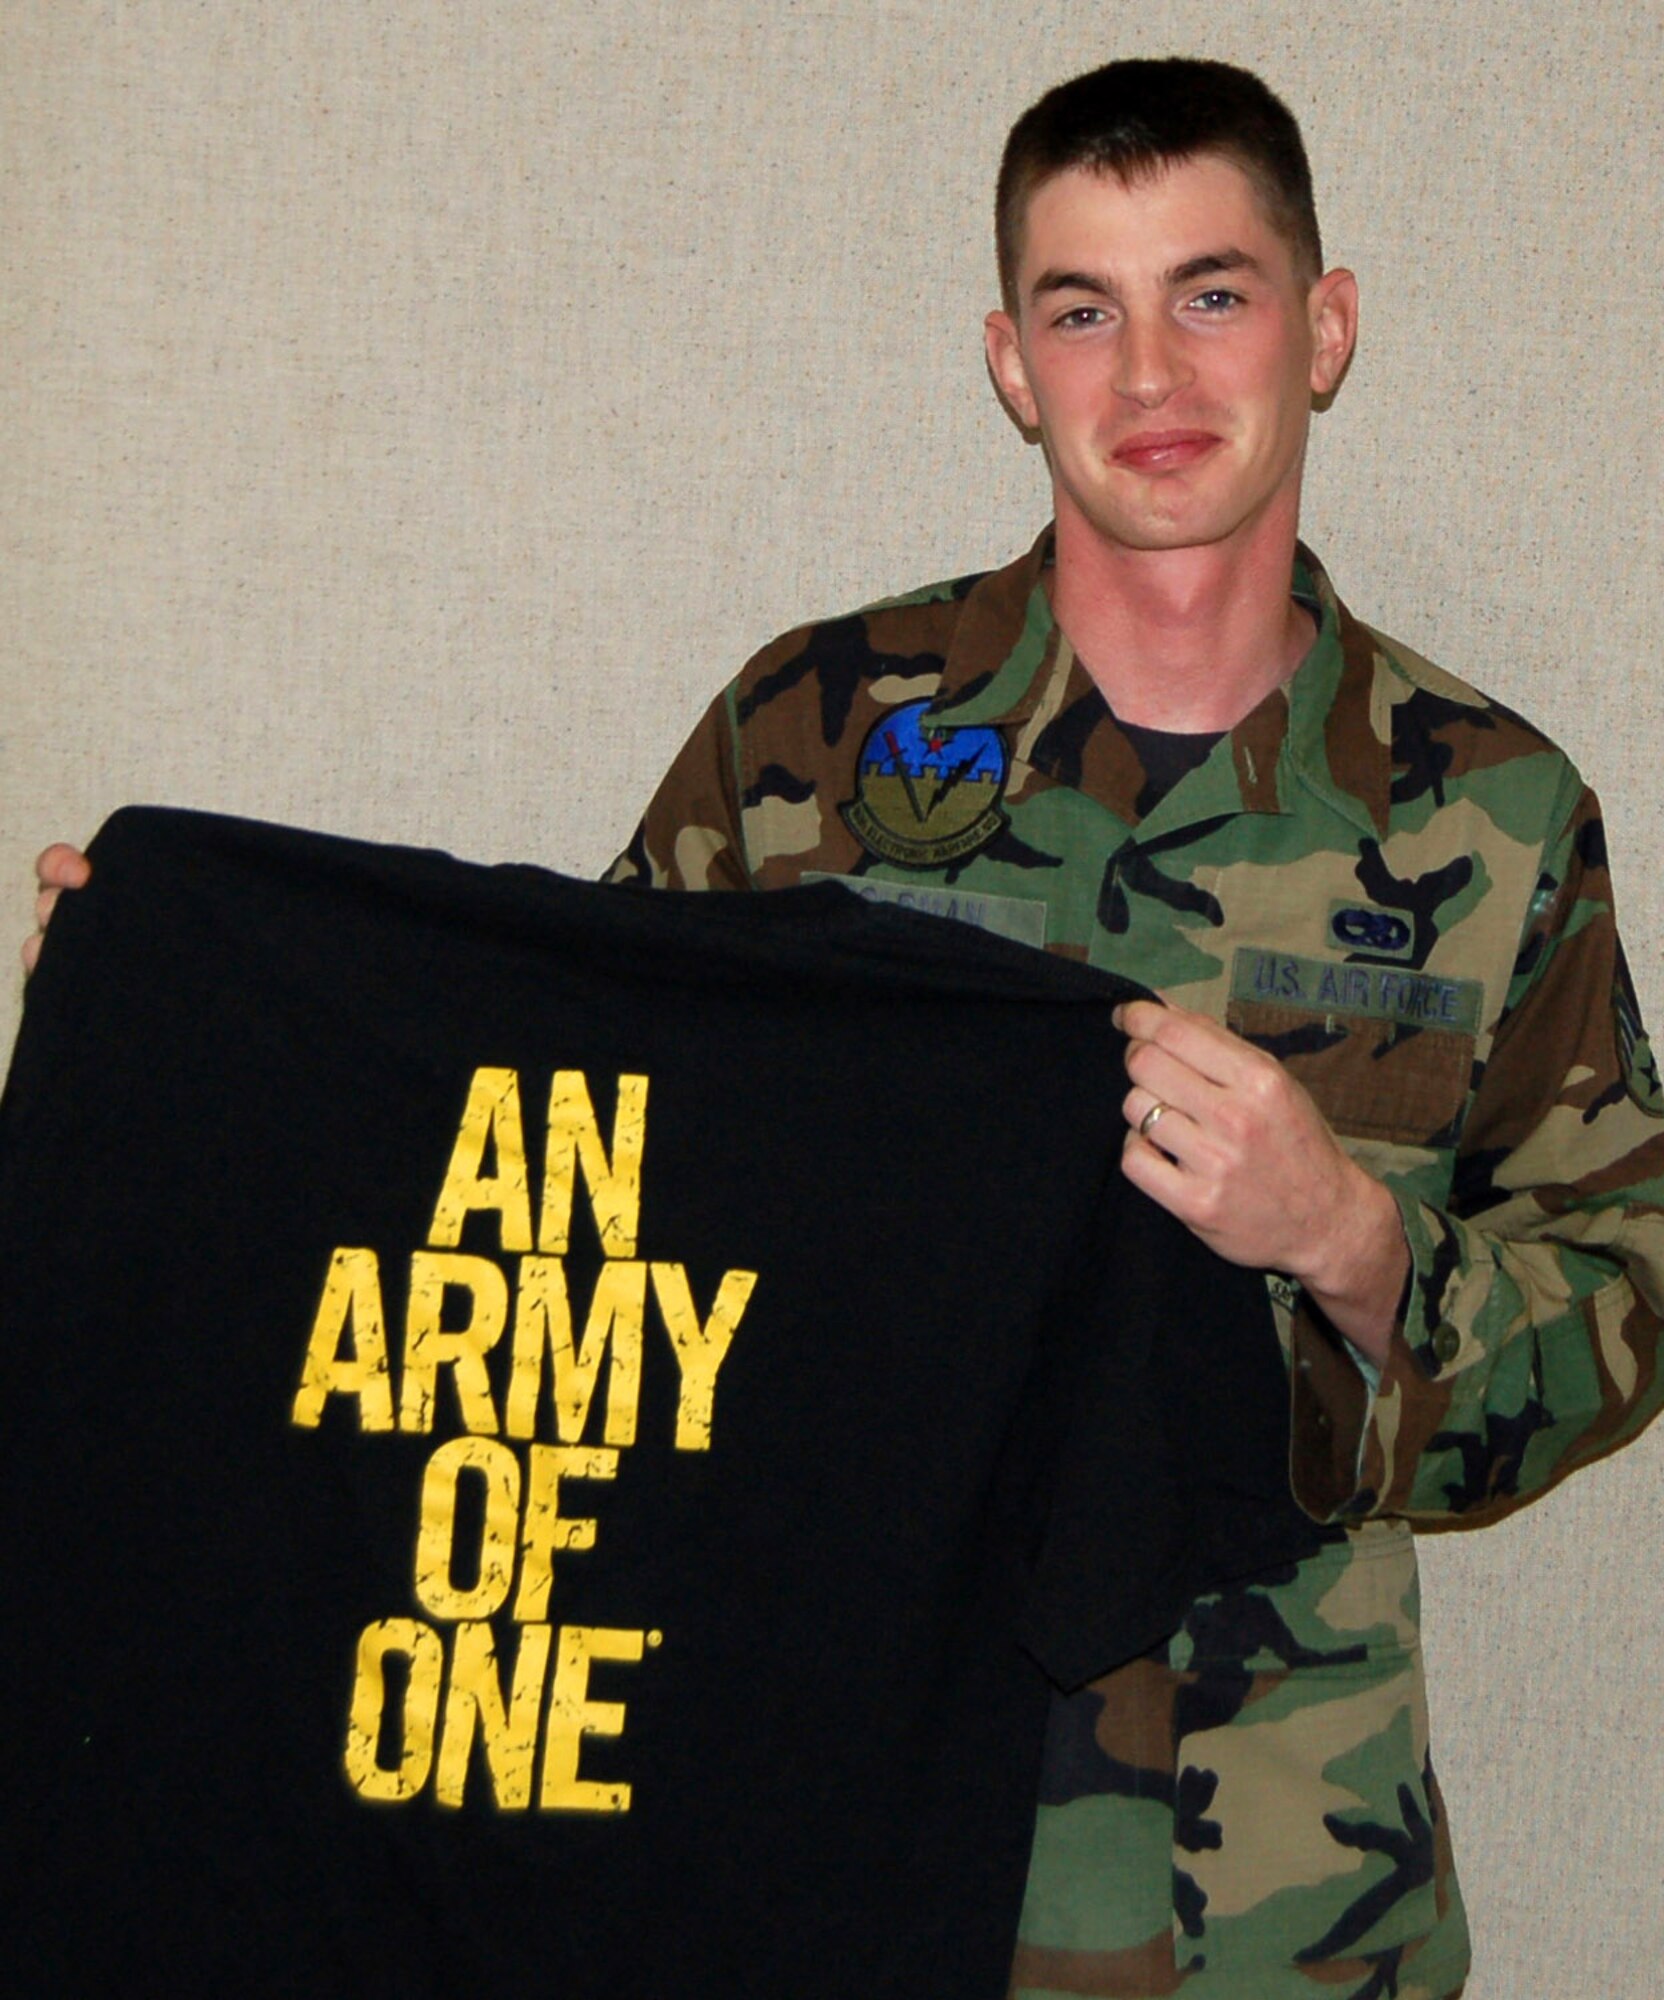 Senior Airman Mike Goldman displays an Army shirt that he will be wearing very soon.  Airman Goldman, a 16th Electronic Warfare Squadron journeyman at Eglin Air Force Base, Fla., is leaving the Air Force Dec. 29 to join the Army through "Operation Blue to Green" where he will become an operating room specialist.  (U.S. Air Force photo)